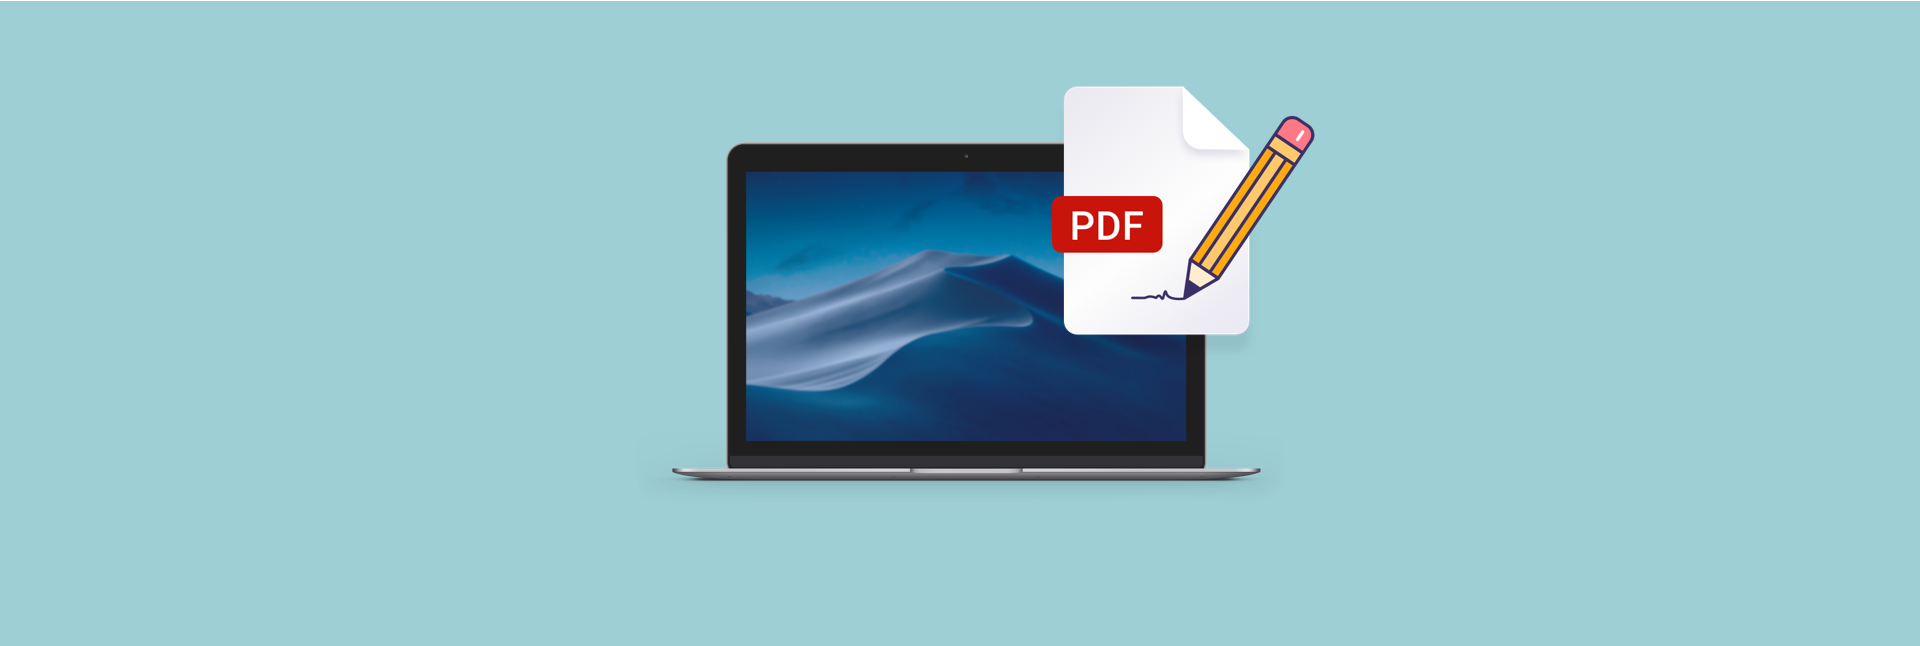 best free pdf editor for mac with good reviews